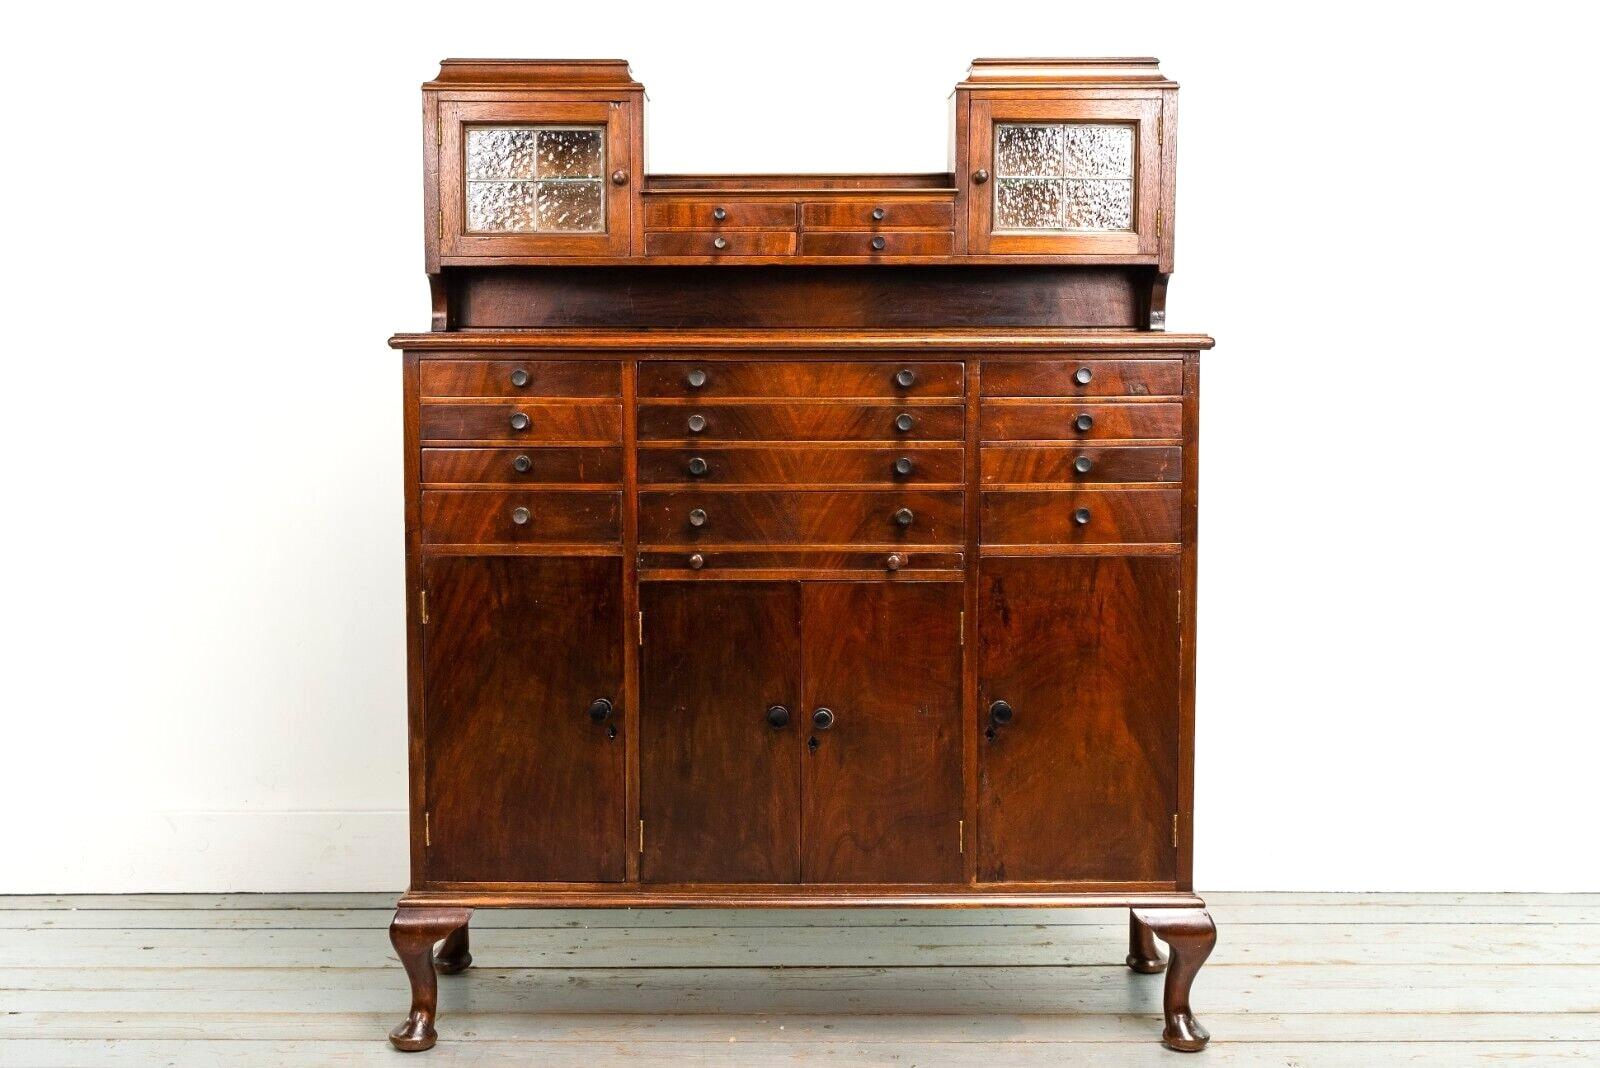 Early 20th Century Mahogany Decorative Dentist or Collectors Cabinet